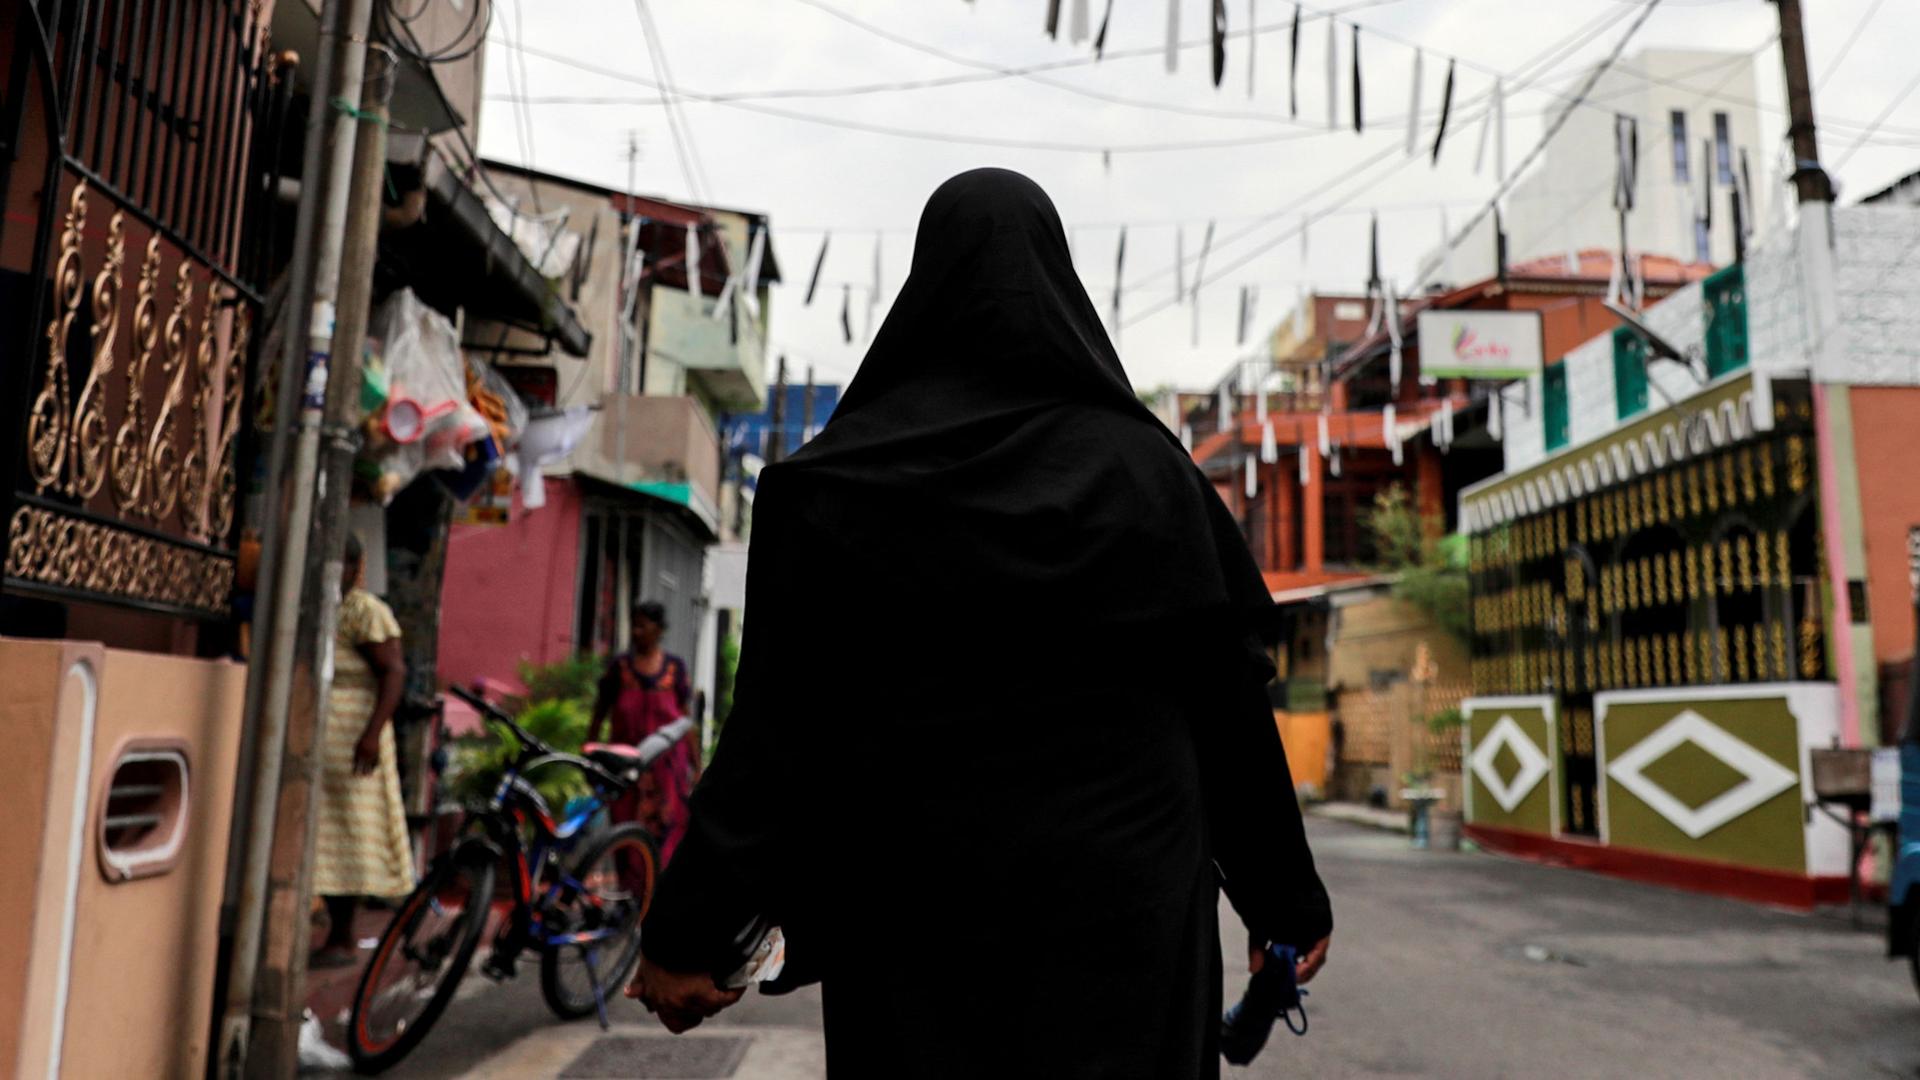 A woman is shown from behind wearing a black hijab walking through the middle of a street.